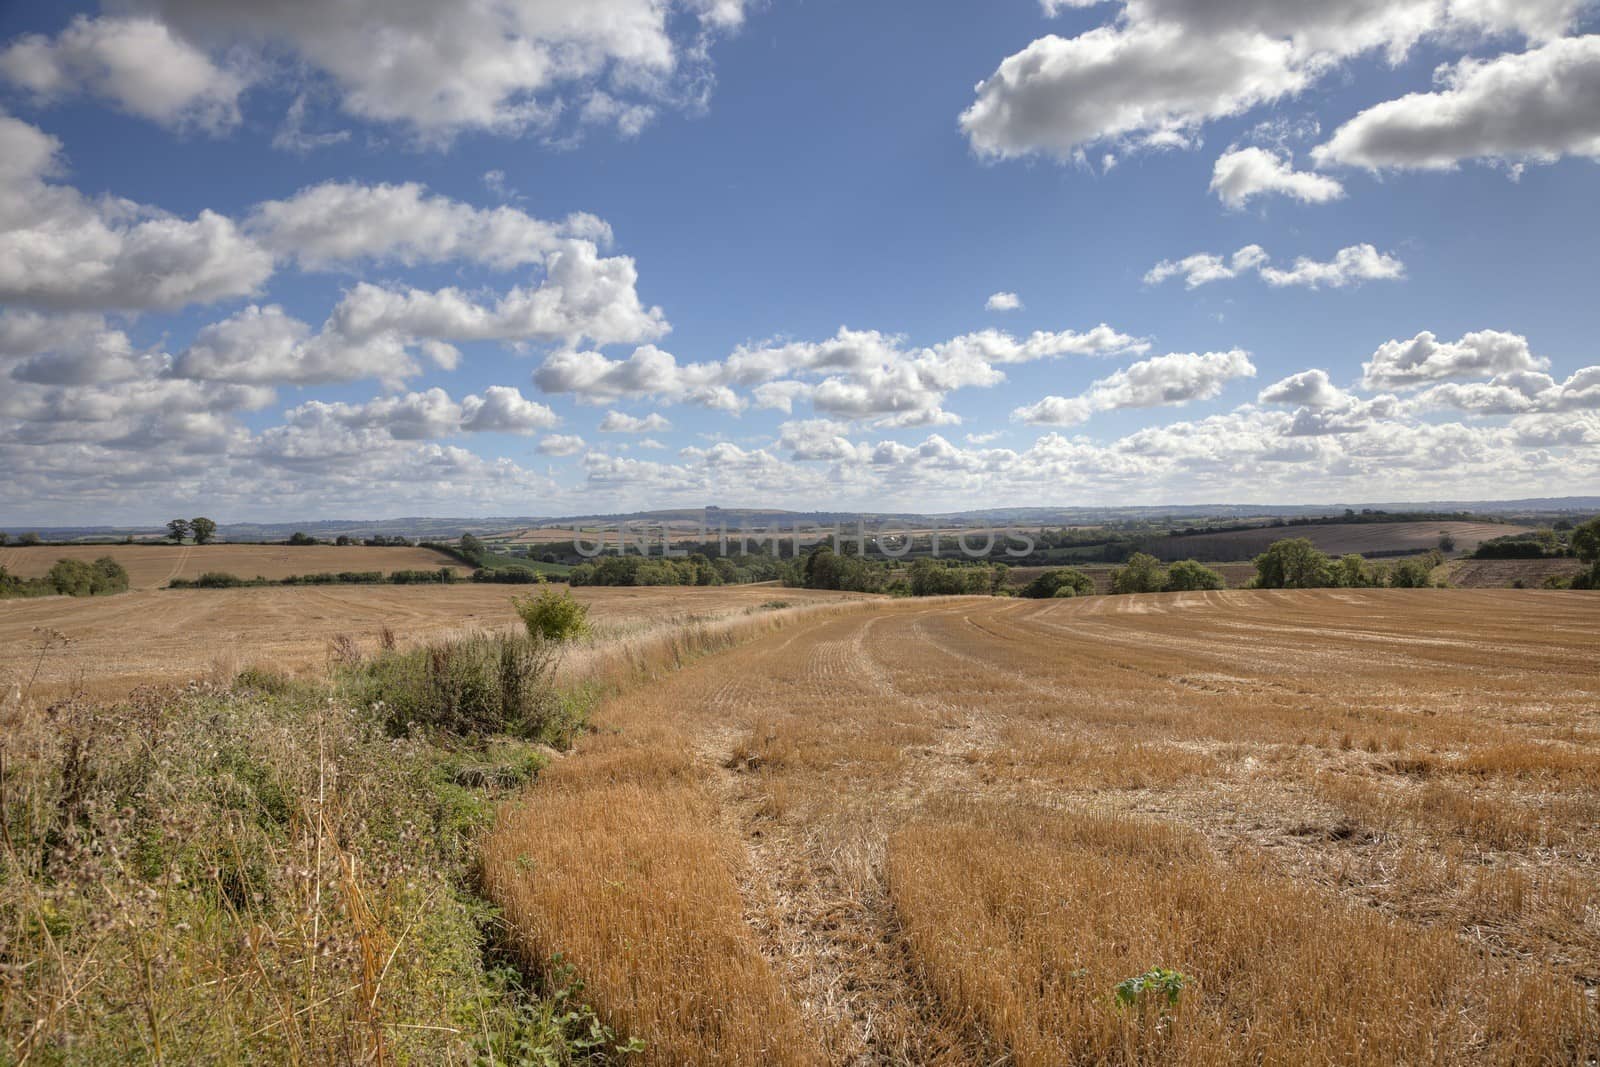 Wheat fields after harvest, English countryside, Gloucestershire, England.